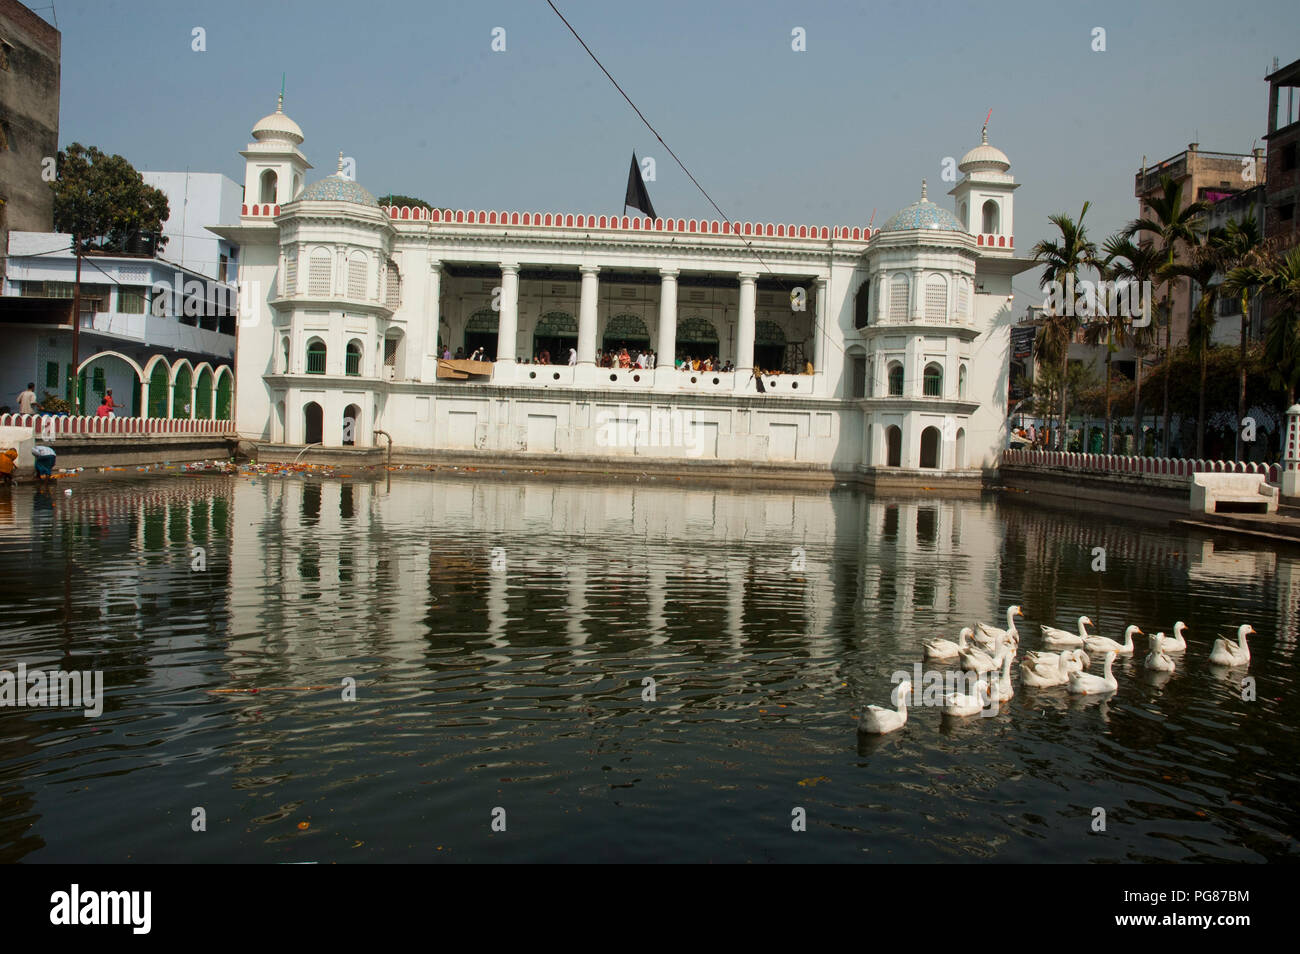 The ancient building of Hussaini Dalan is one of the oldest monuments of Dhaka. Mir Murad the superintendent of the Nawara (Fleet of Boats) estates of Stock Photo